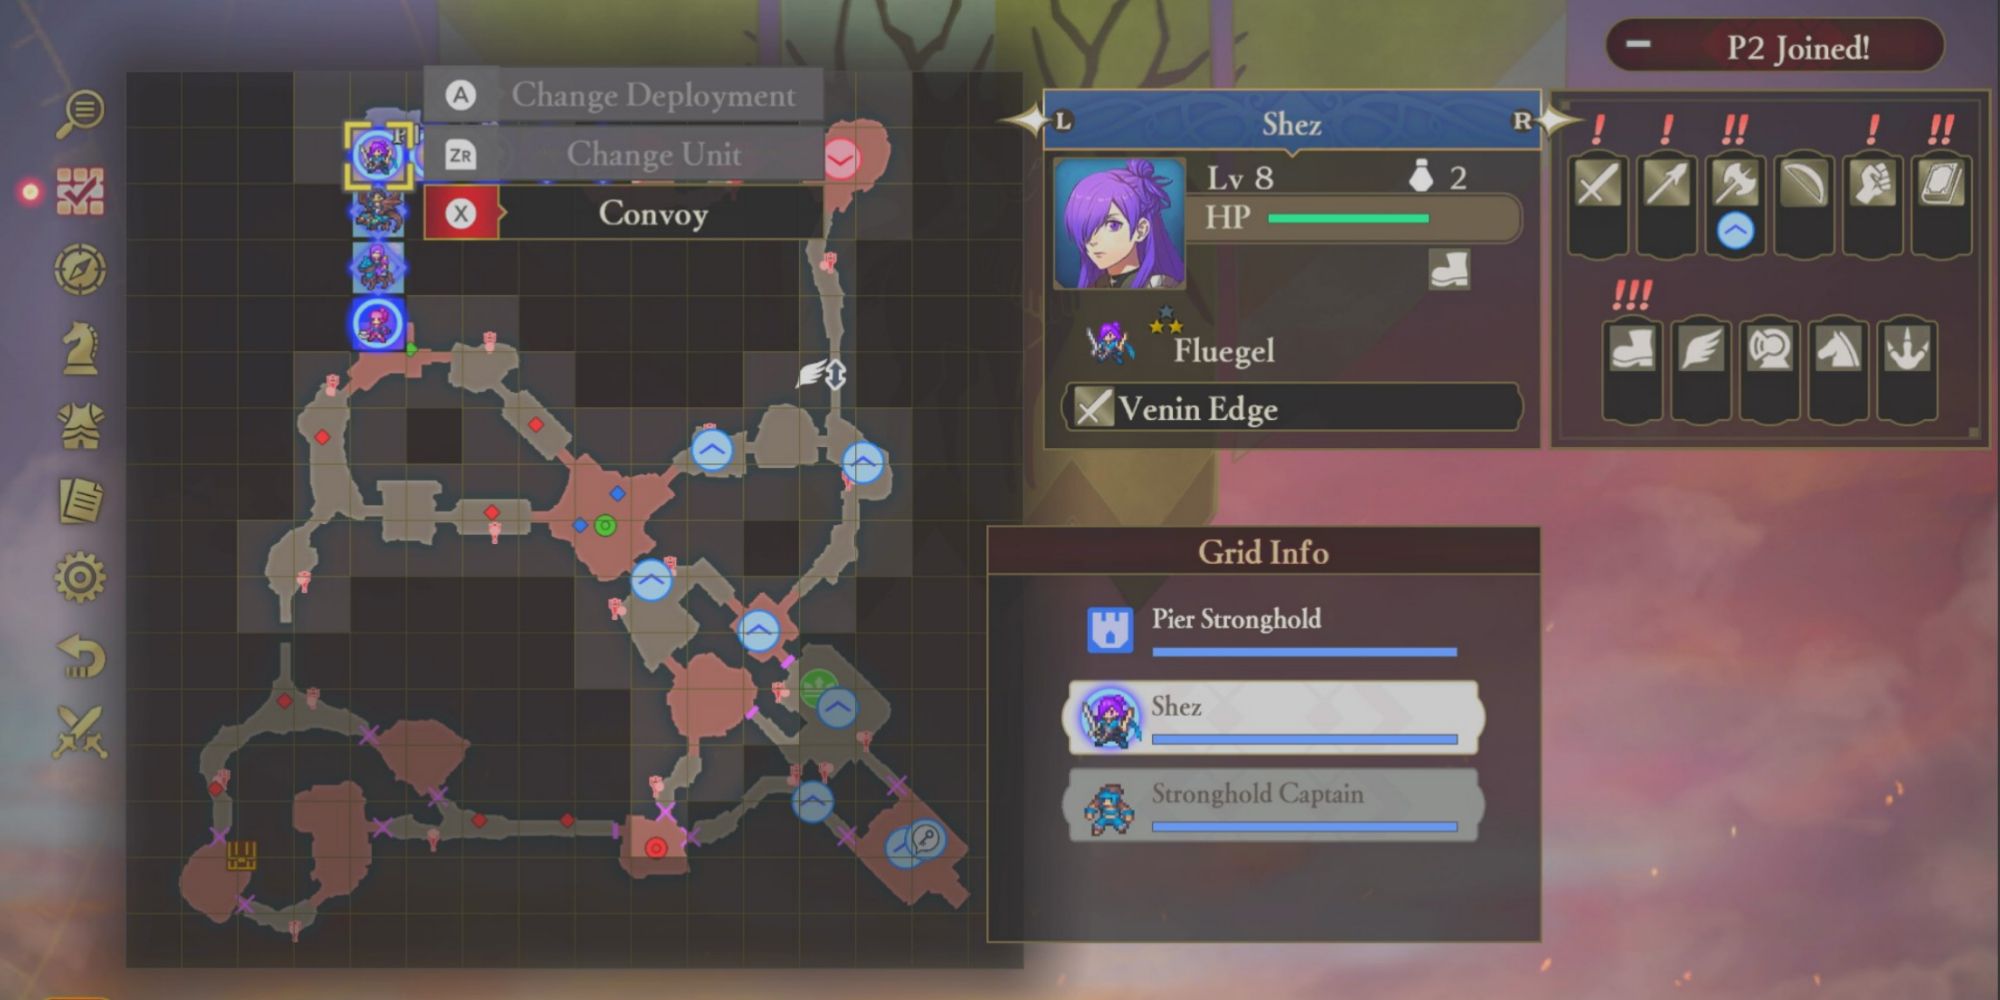 Shez is selected on the battlefield map, and enemy units to the south have blue arrows labelled on them